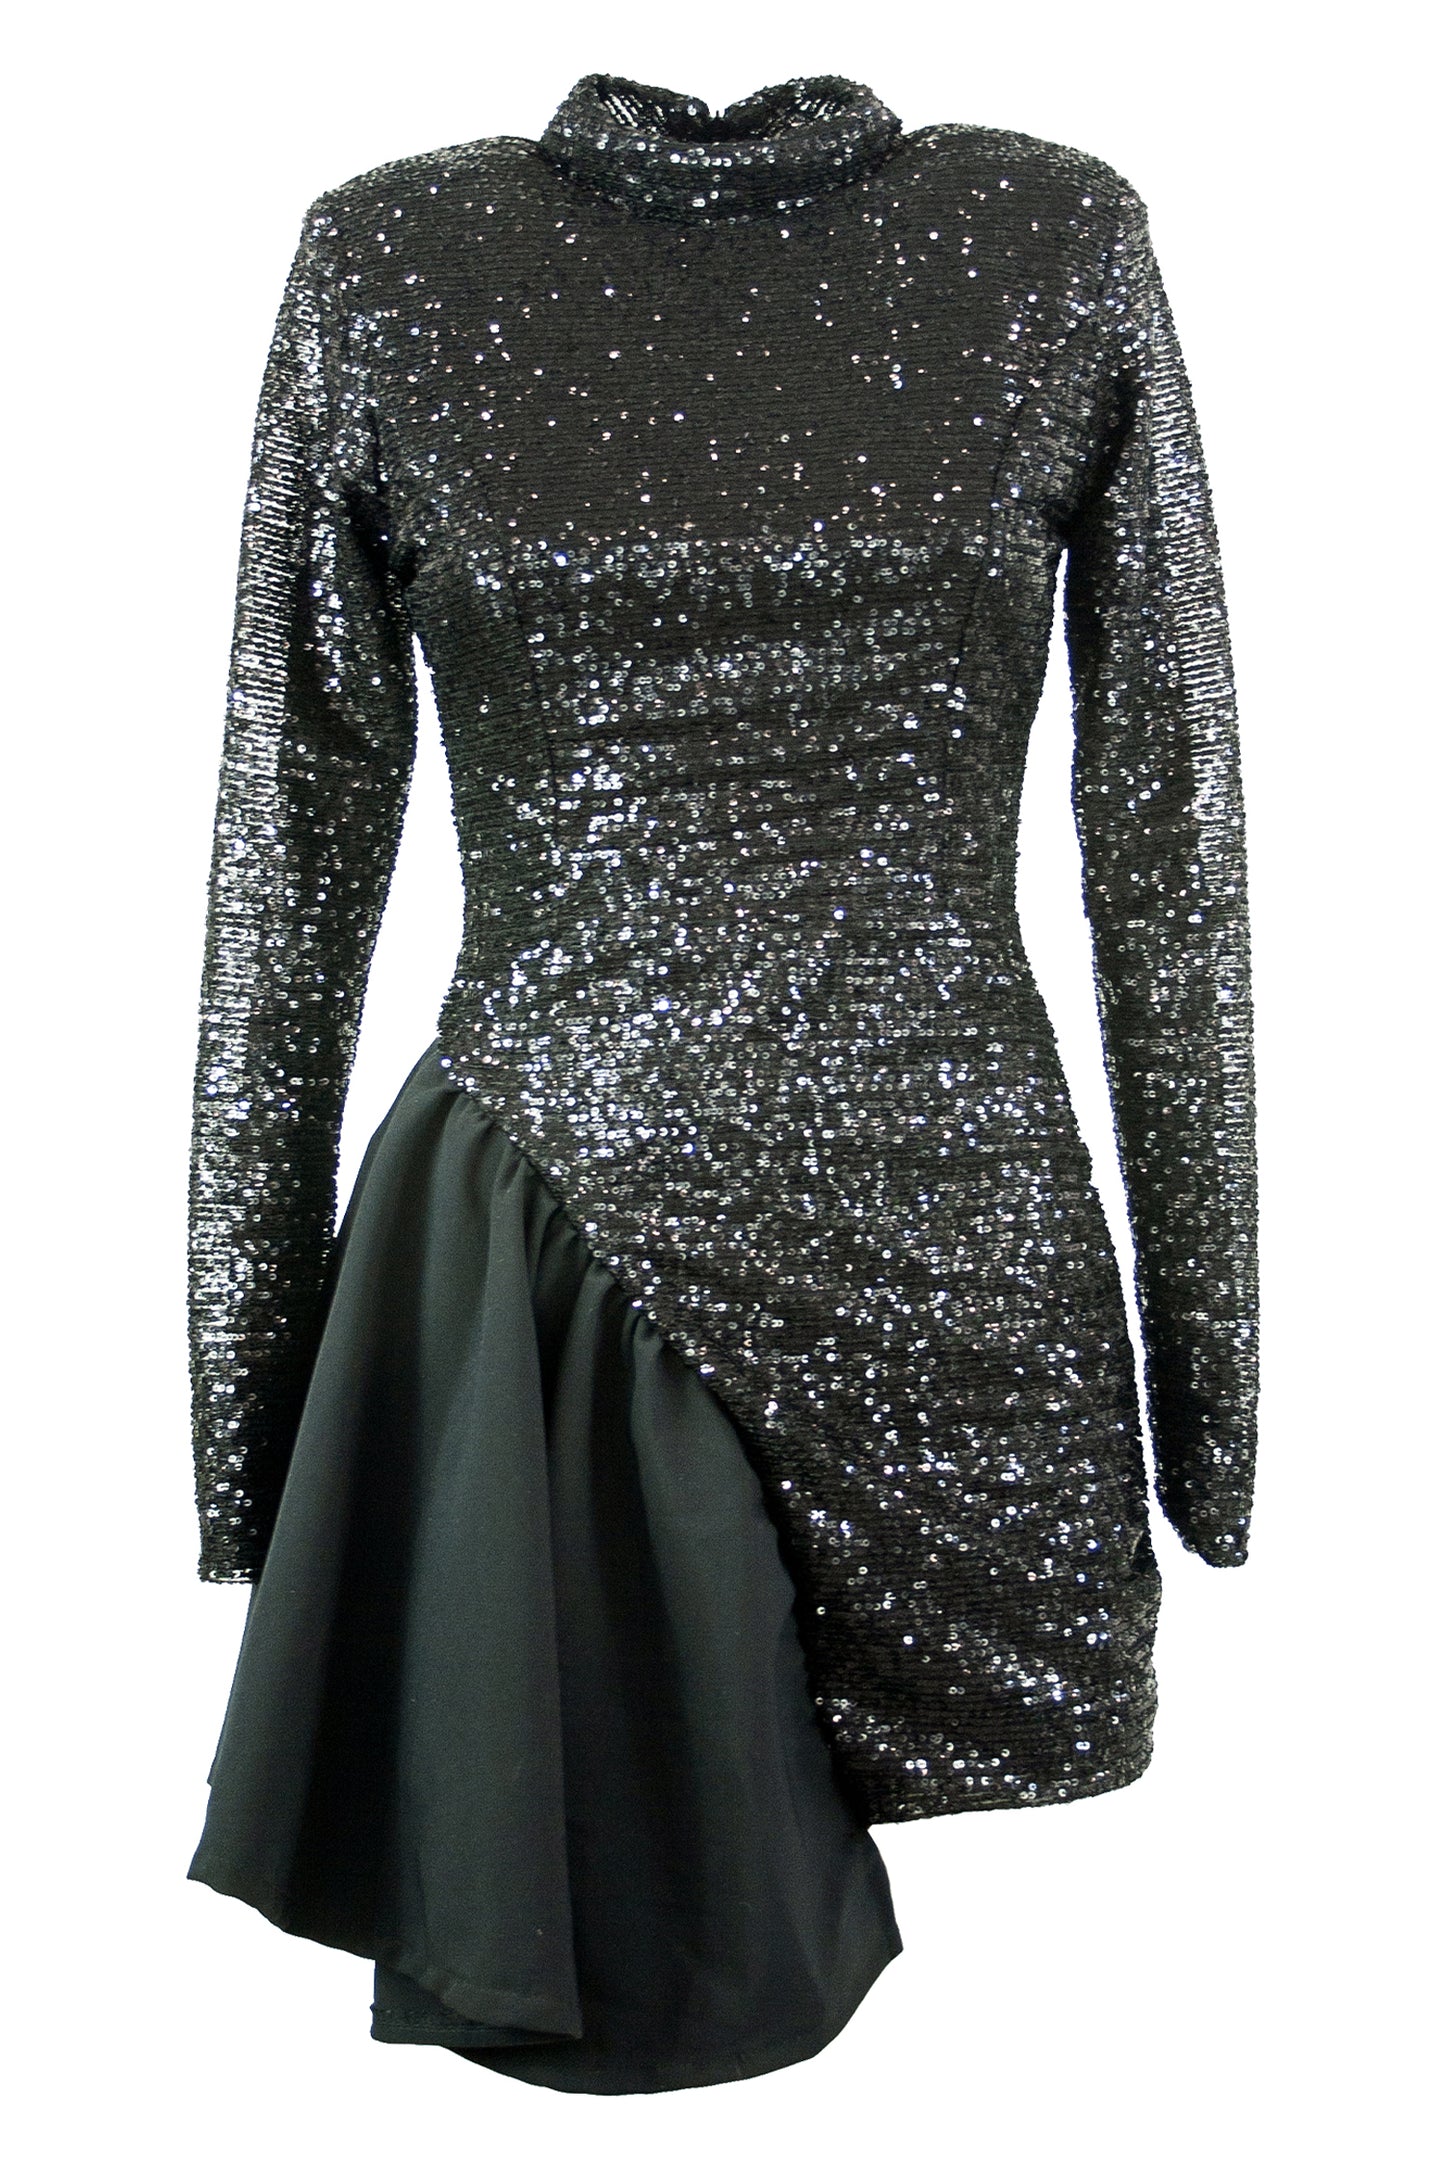 KENDALL AND KYLIE
Kendall + Kylie black dress in sequins